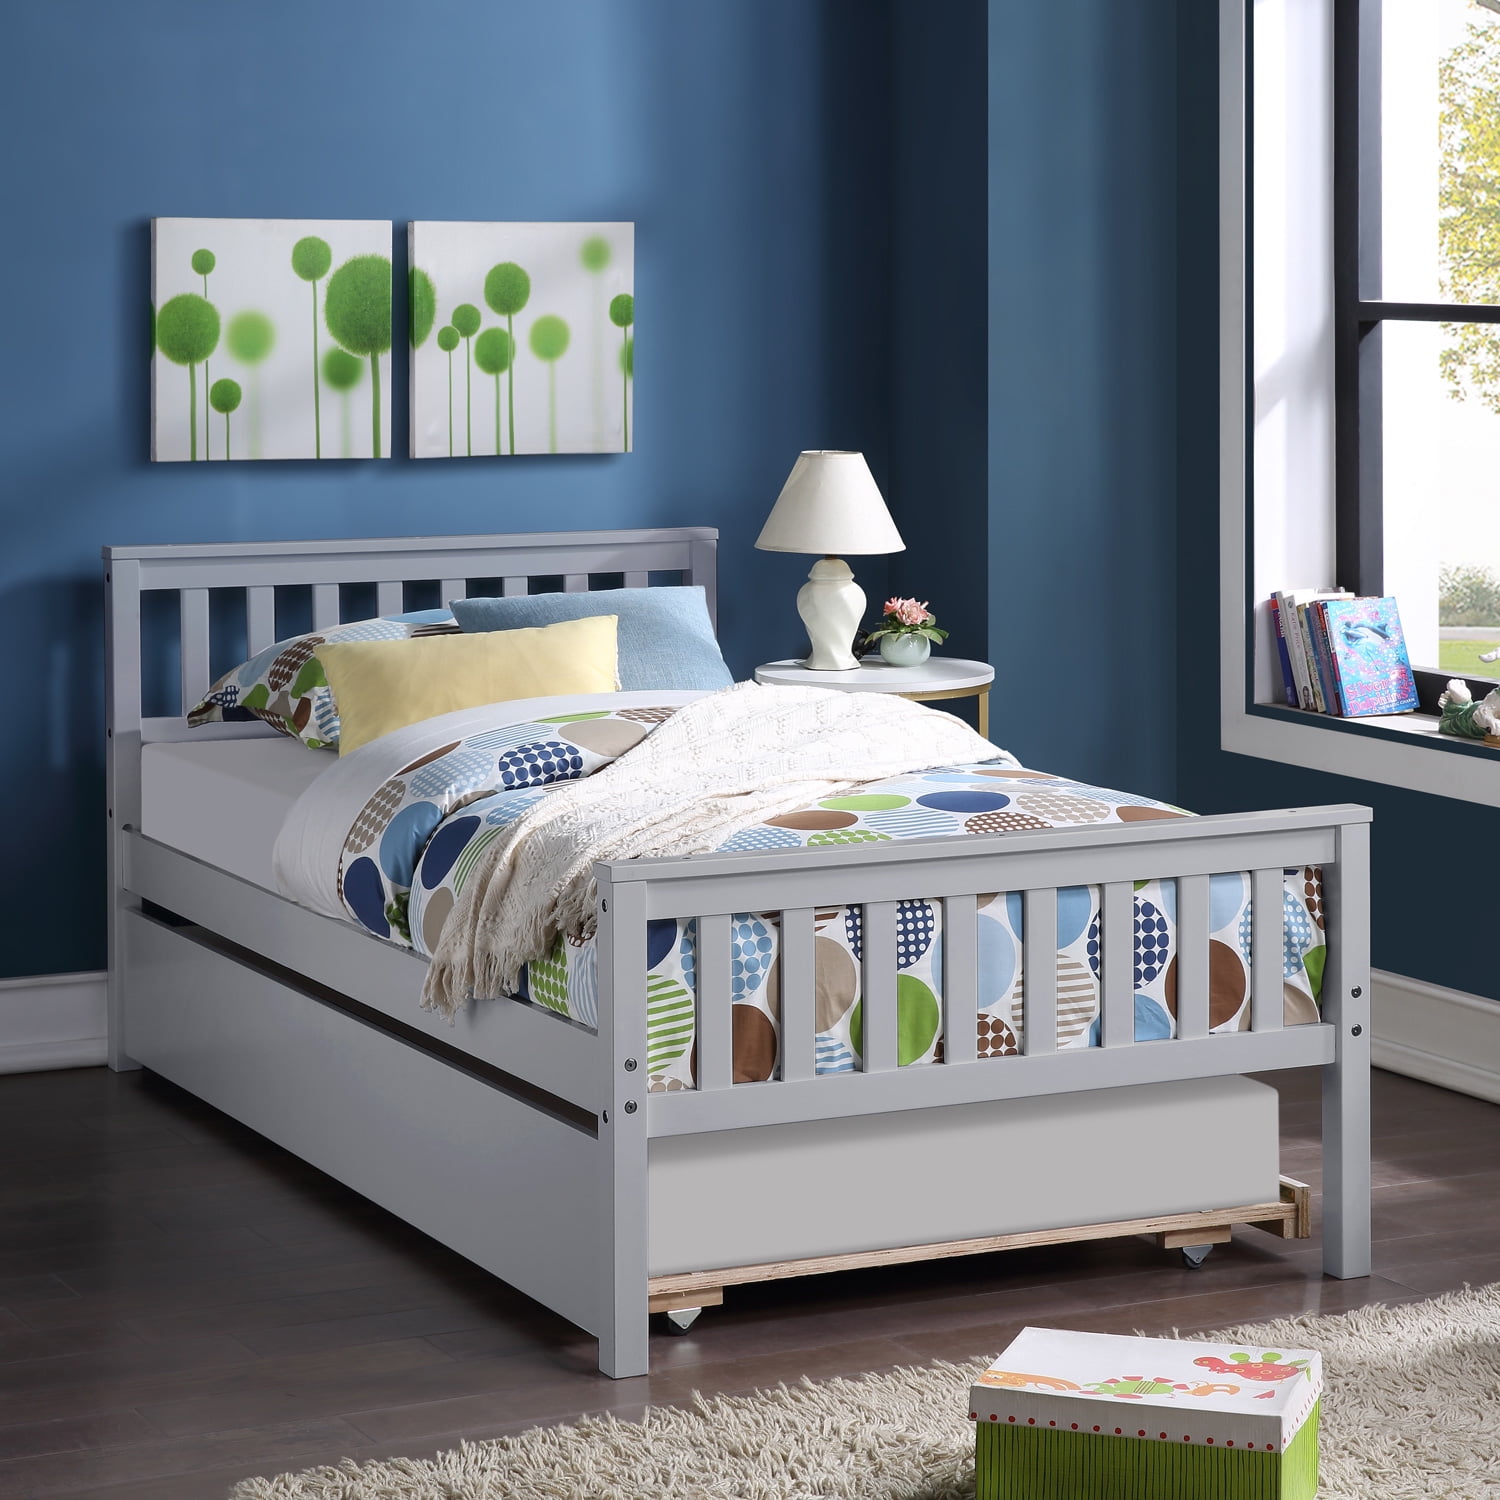 Details about   Gray Twin Size Bed Frame Wooden Bed Platform w/Trundle and headboard Footboard 